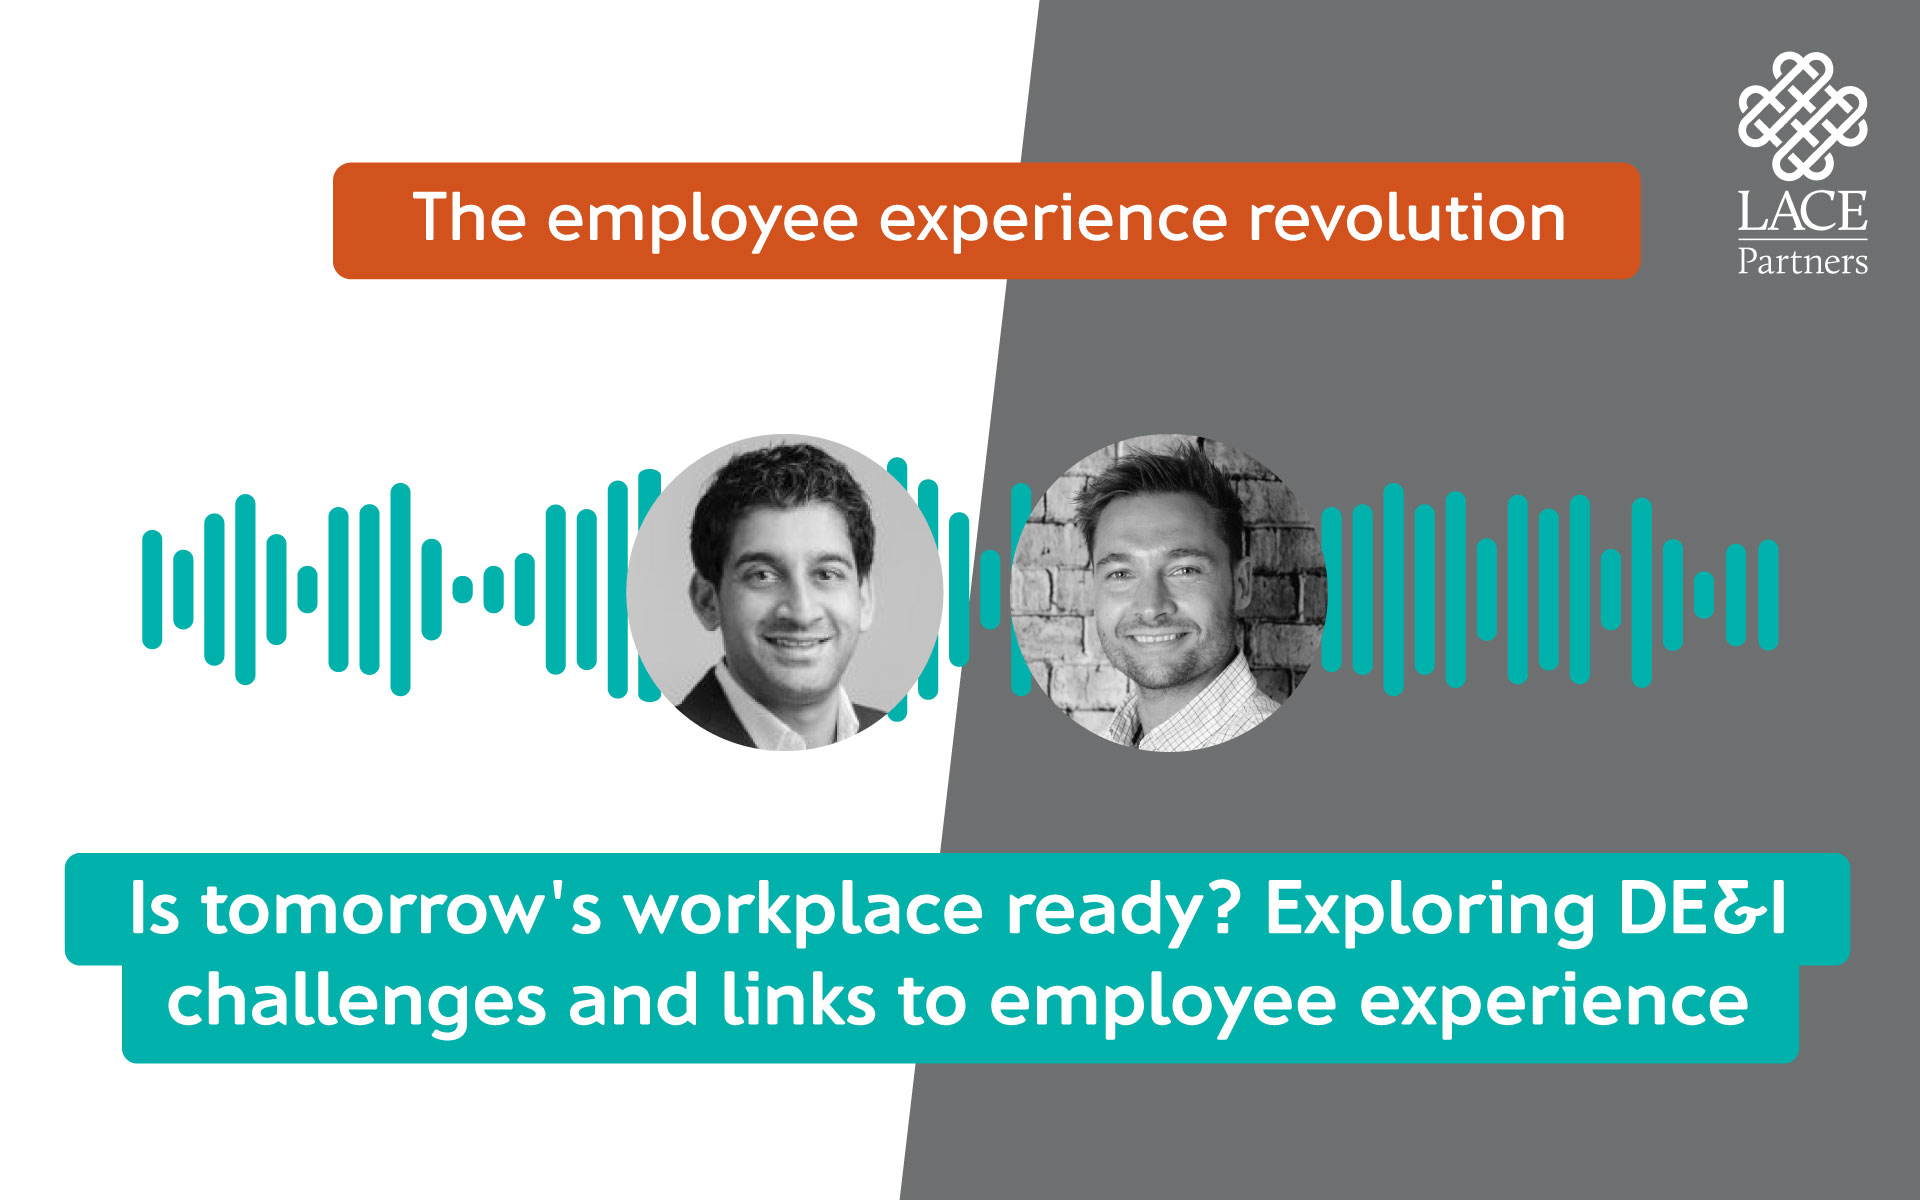 Is tomorrow’s workplace ready? Exploring DE&I challenges and links to employee experience